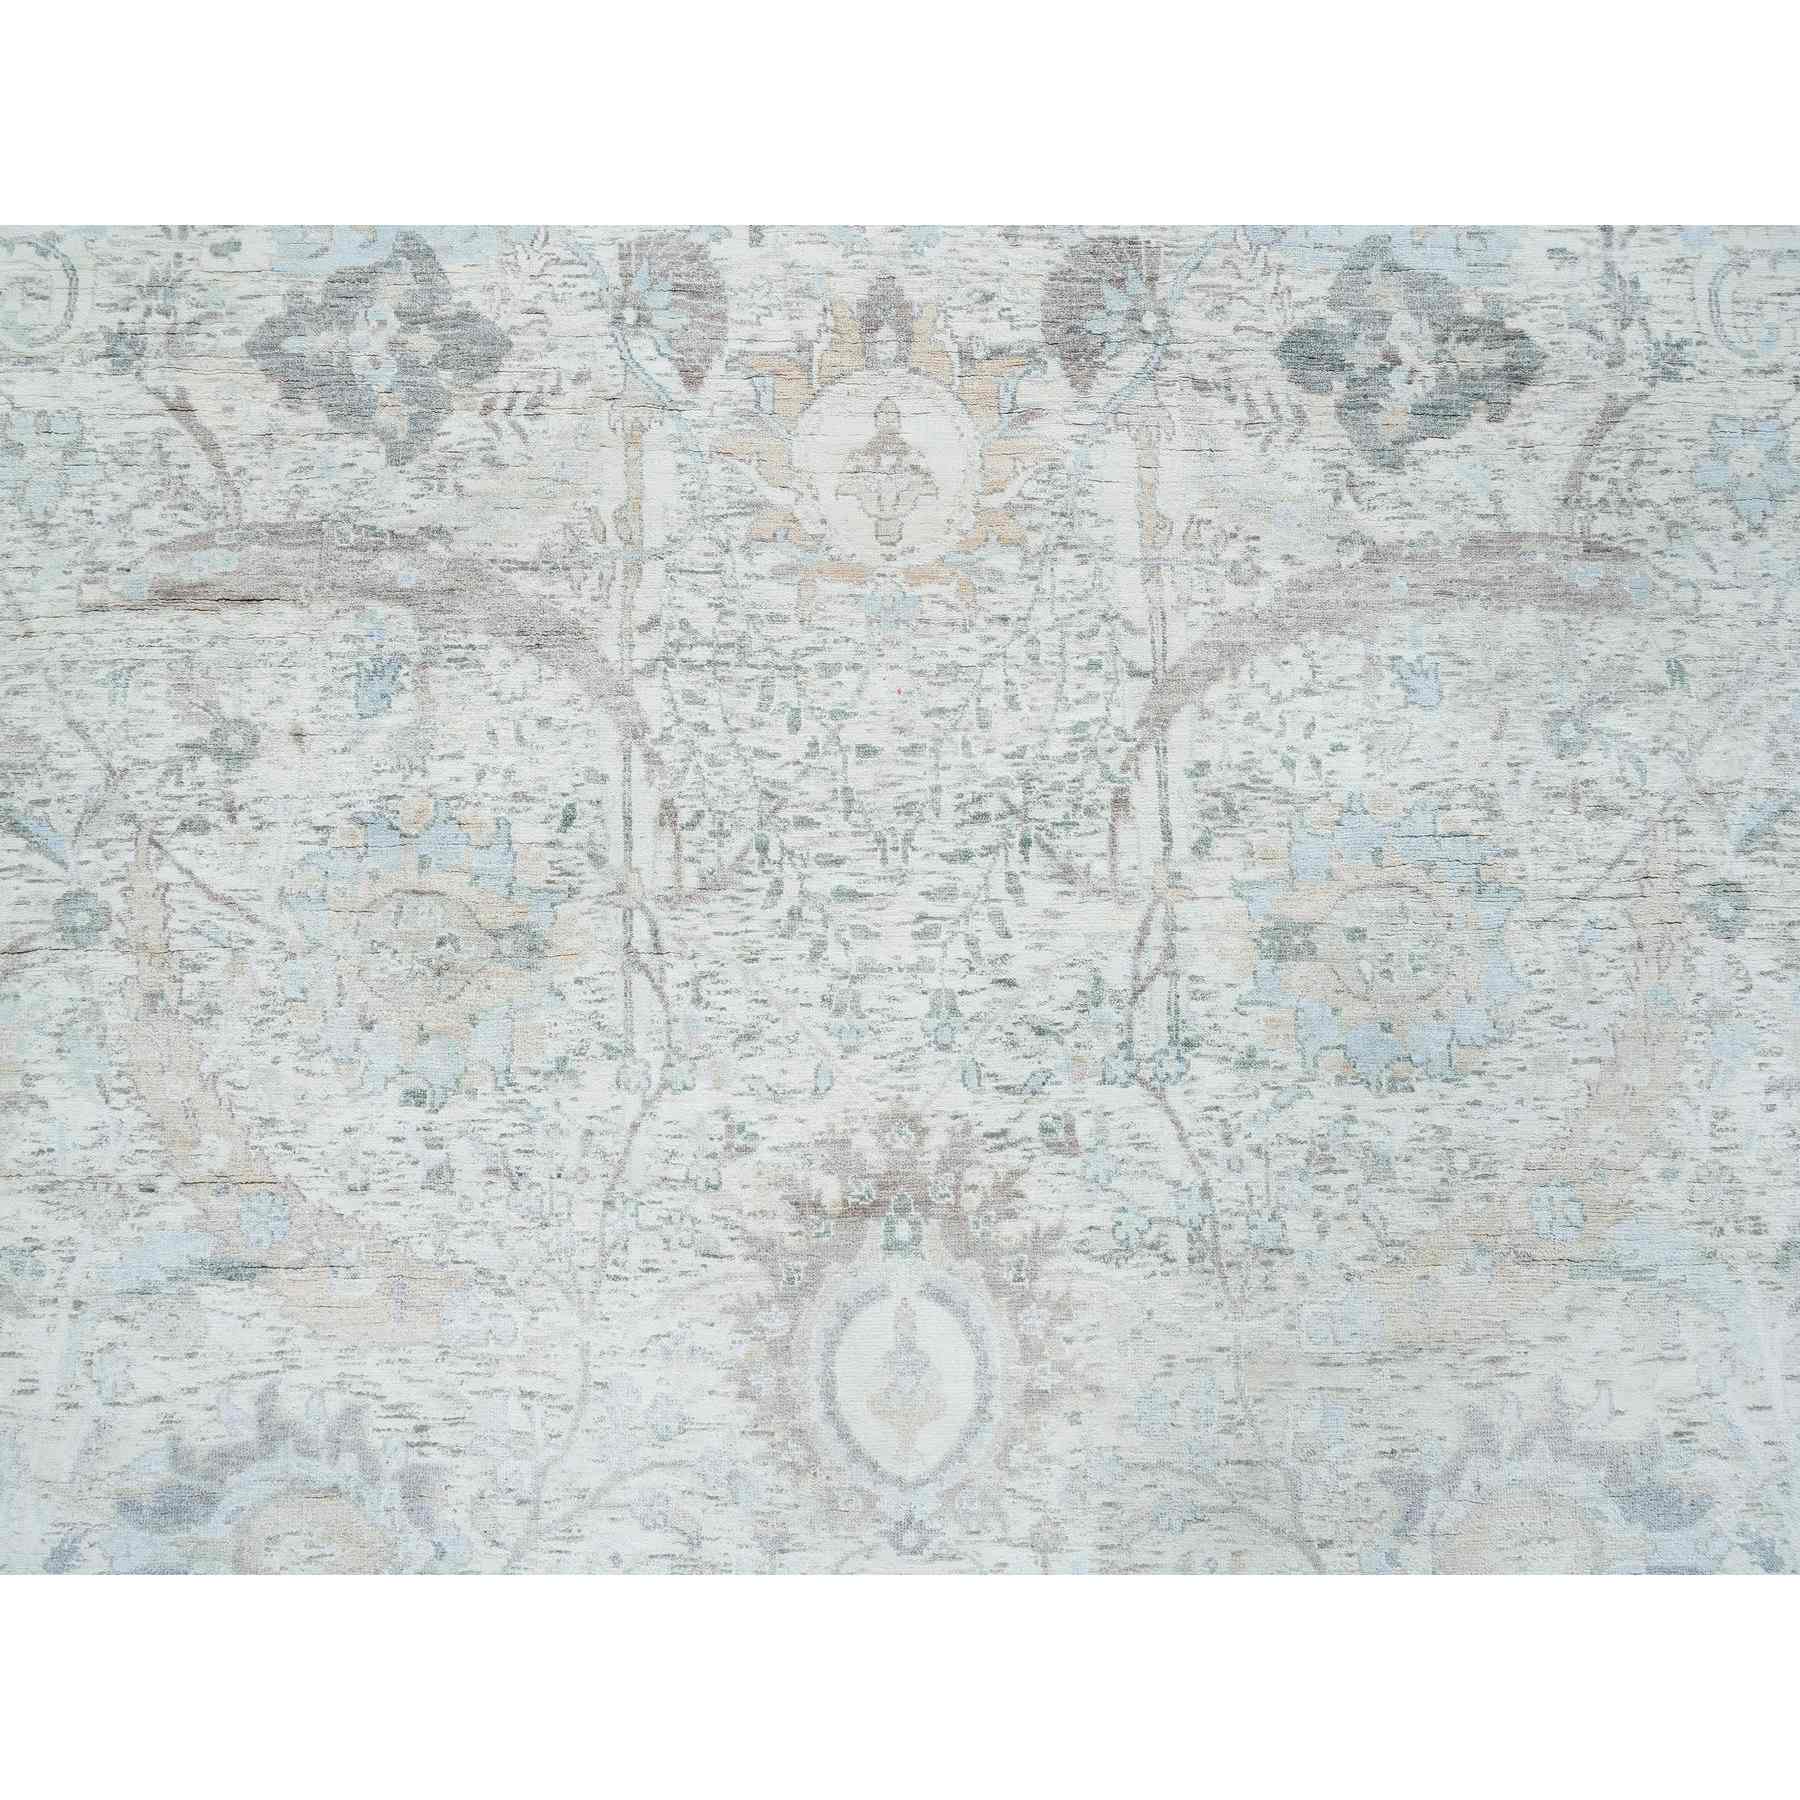 Transitional-Hand-Knotted-Rug-324490